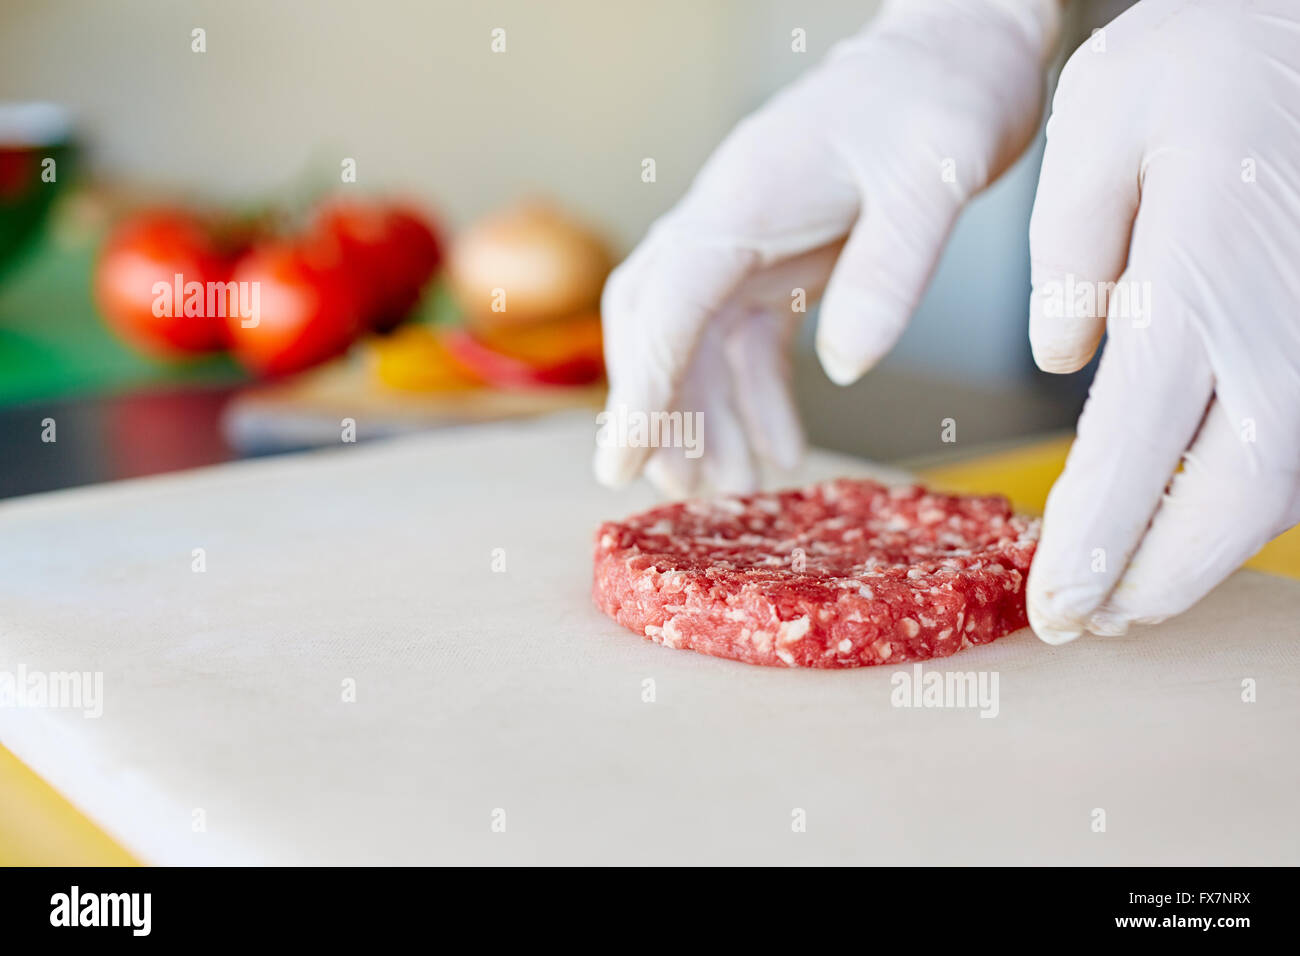 Hands in white gloves prearing a fresh hamburger patty Stock Photo